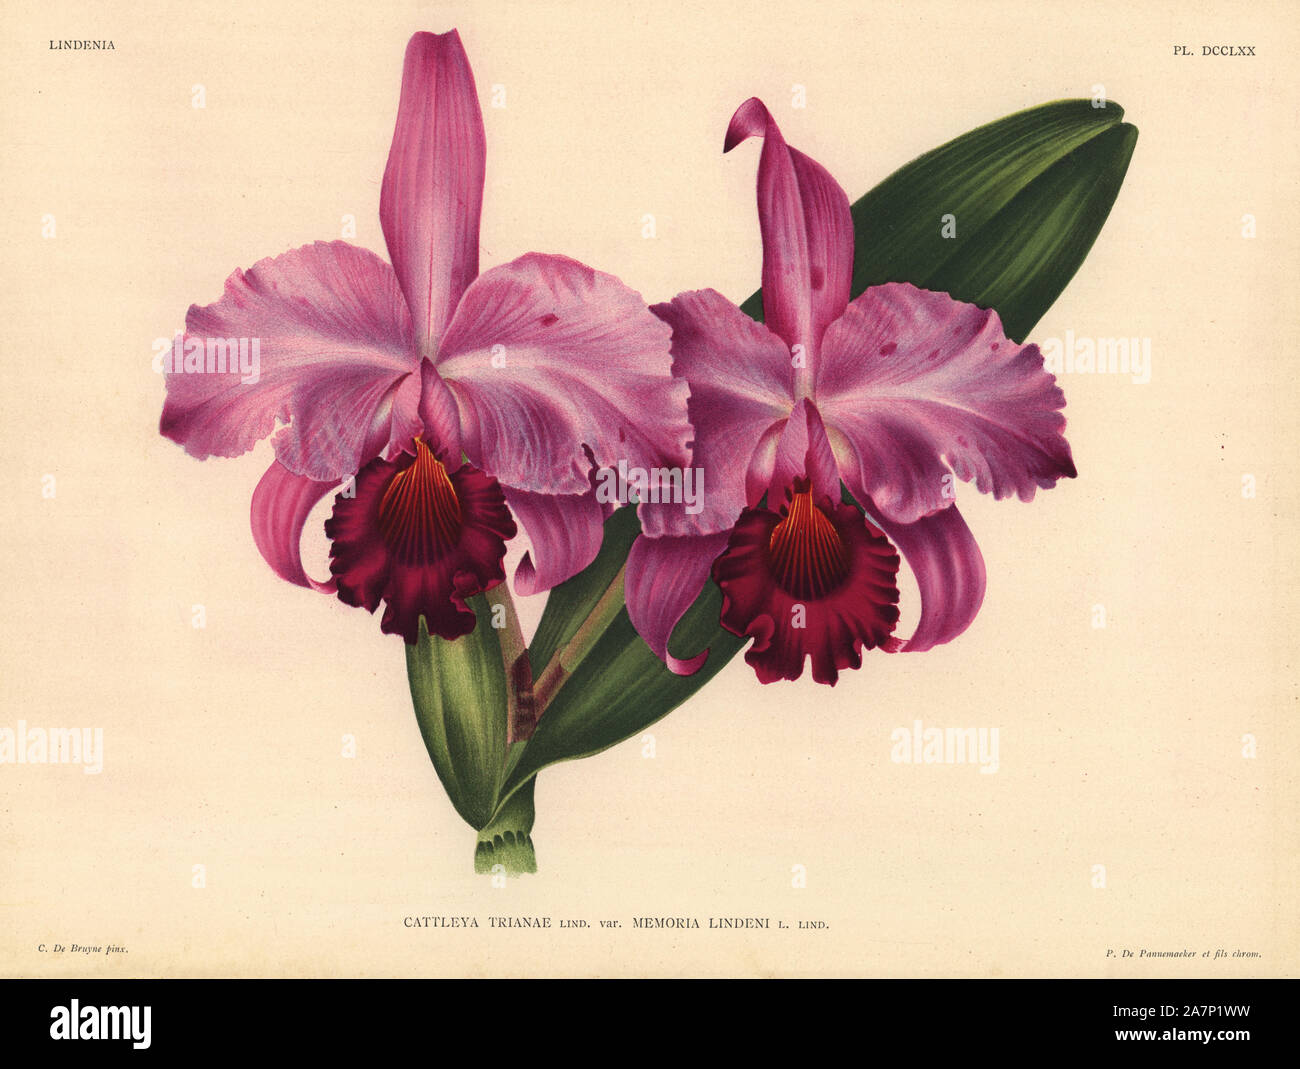 Cattleya trianae Lind. var. Memoria Lindeni hybrid orchid. Illustration drawn by C. de Bruyne and chromolithographed by P. de Pannemaeker et fils from Lucien Linden's 'Lindenia, Iconographie des Orchidees,' Brussels, 1902. Stock Photo